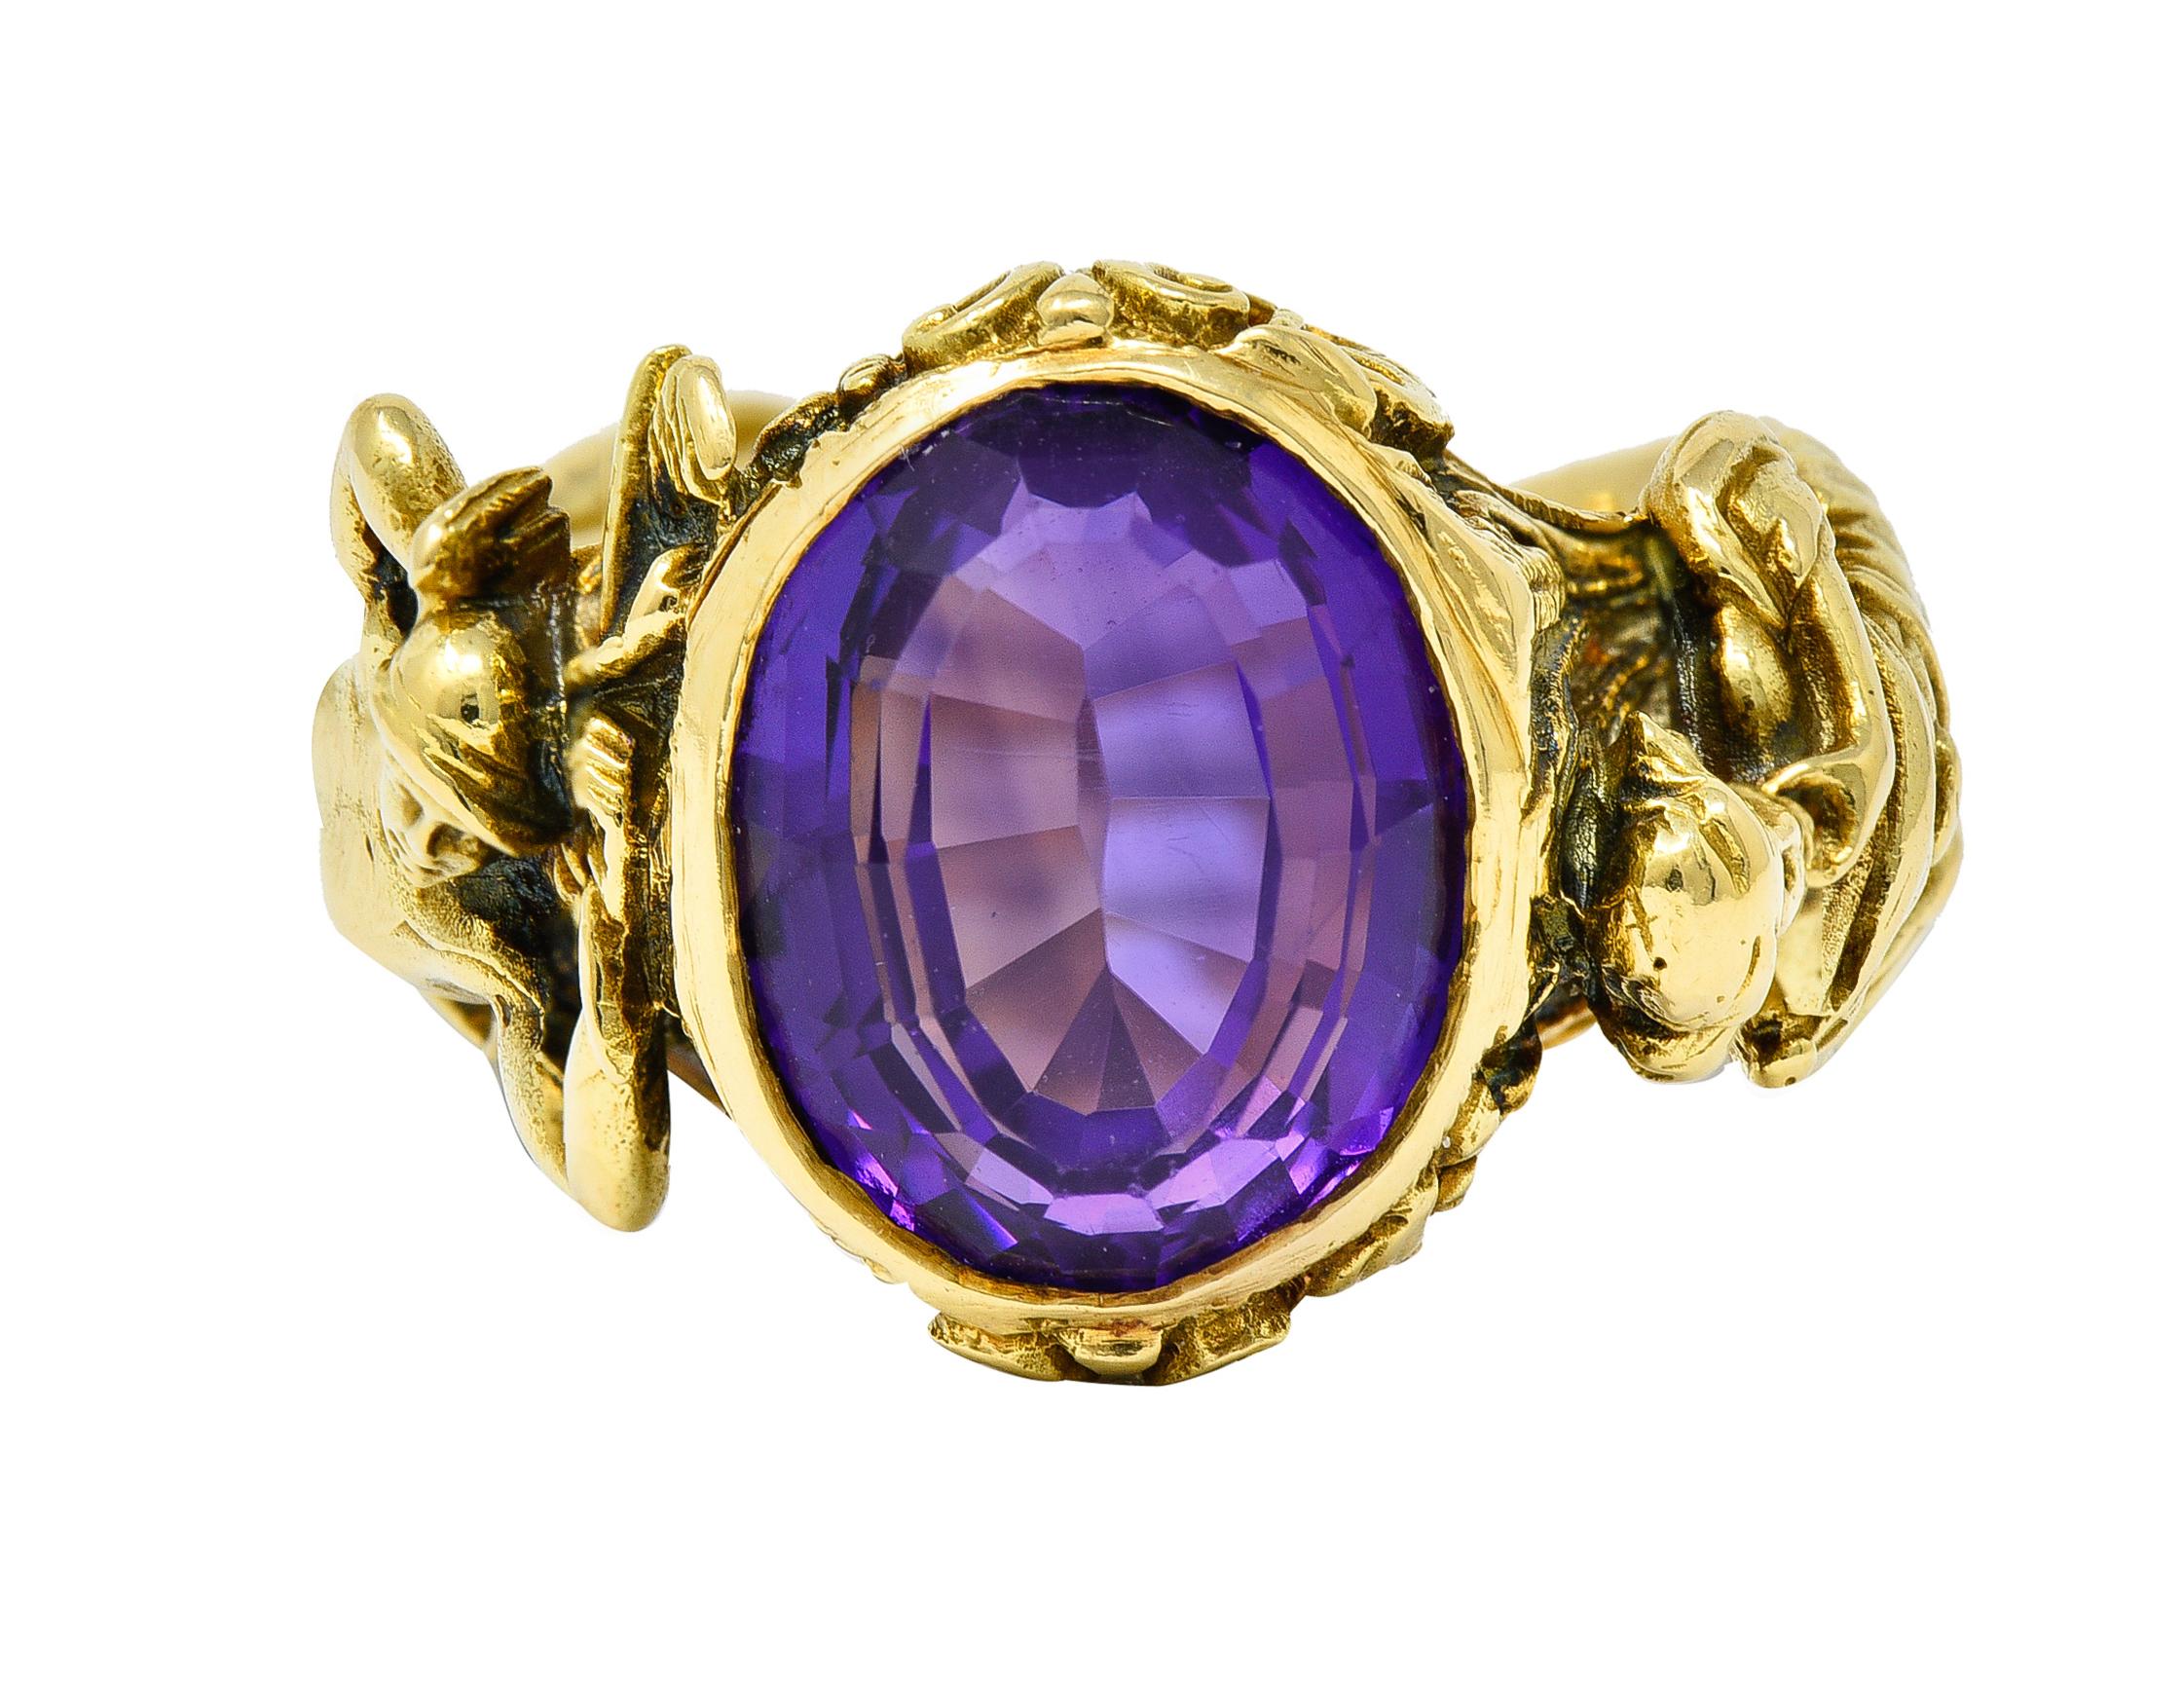 Centering on oval mixed step cut amethyst measuring approximately 12.5 x 10.0 mm
Transparent with medium-light and strongly purple color

Bezel set in a highly rendered mounting depicting the Hellenistic figures of Hermes and Demeter

Male figure is